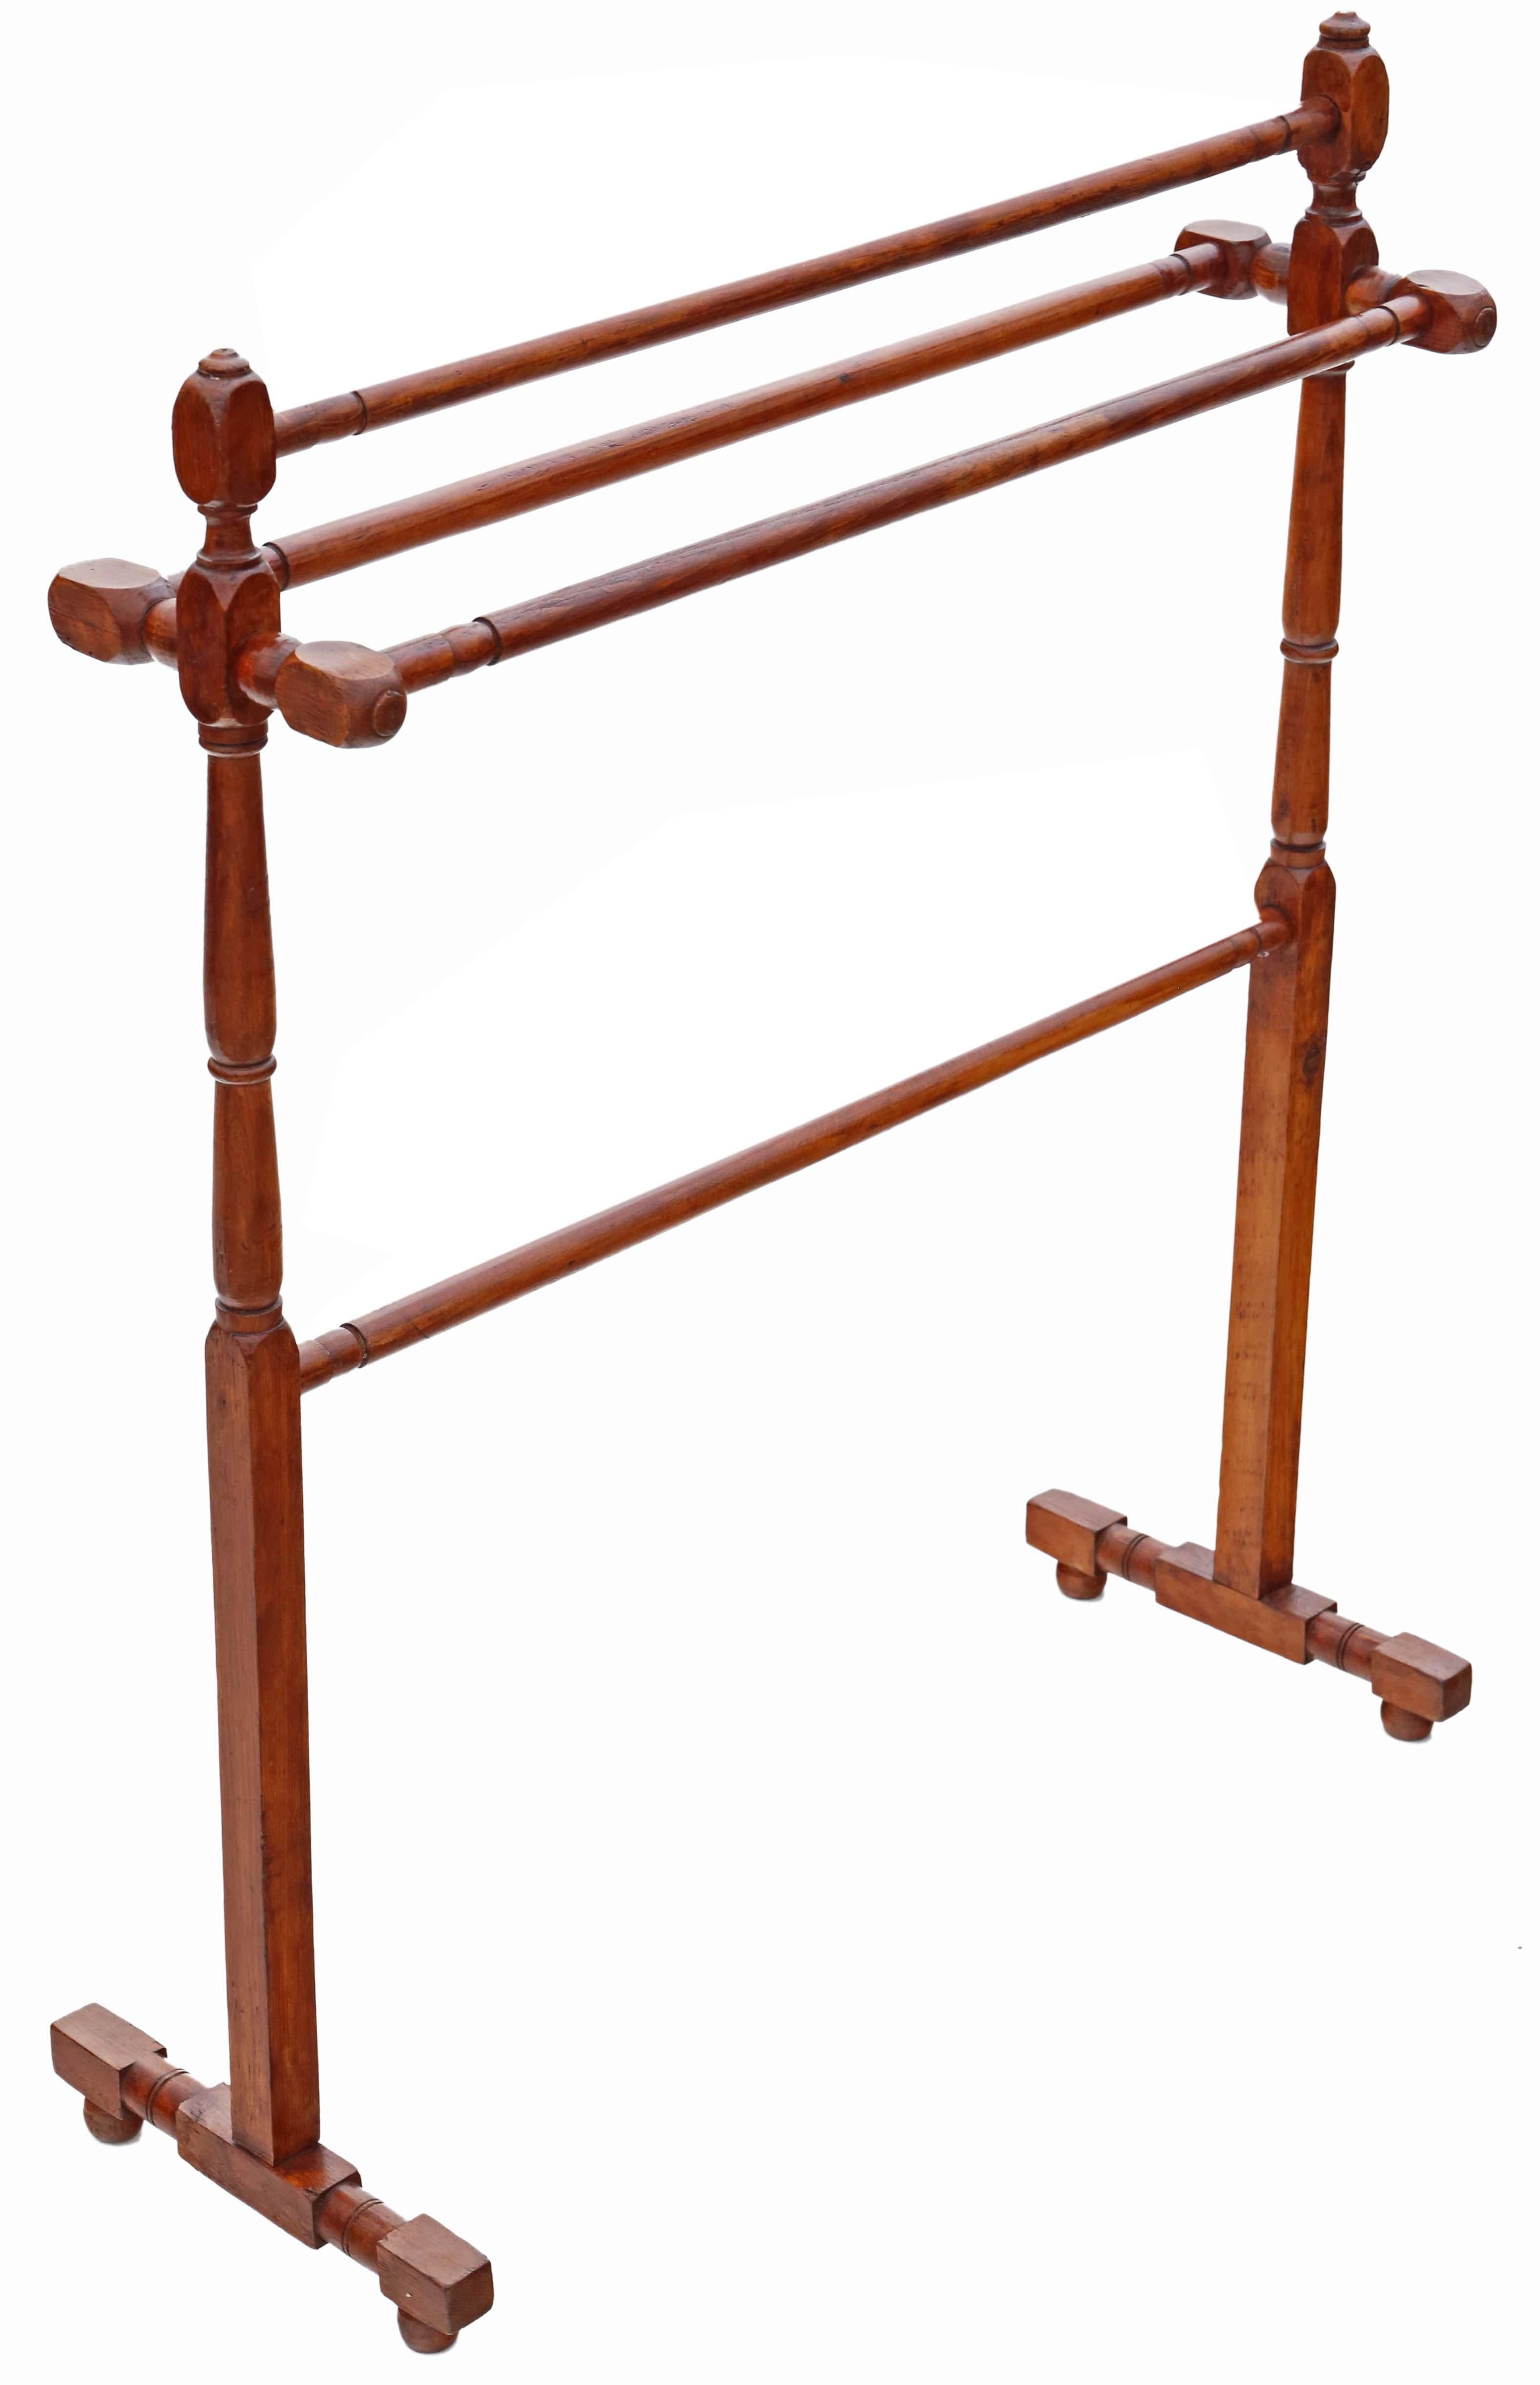 Antique quality C1900 beech and pine towel rail stand. Lovely warm walnut colour.

No loose joints and no woodworm.

Would look amazing in the right location!

Overall maximum dimensions:

71cmW x 28cmD x 87cmH.

In good antique condition with minor